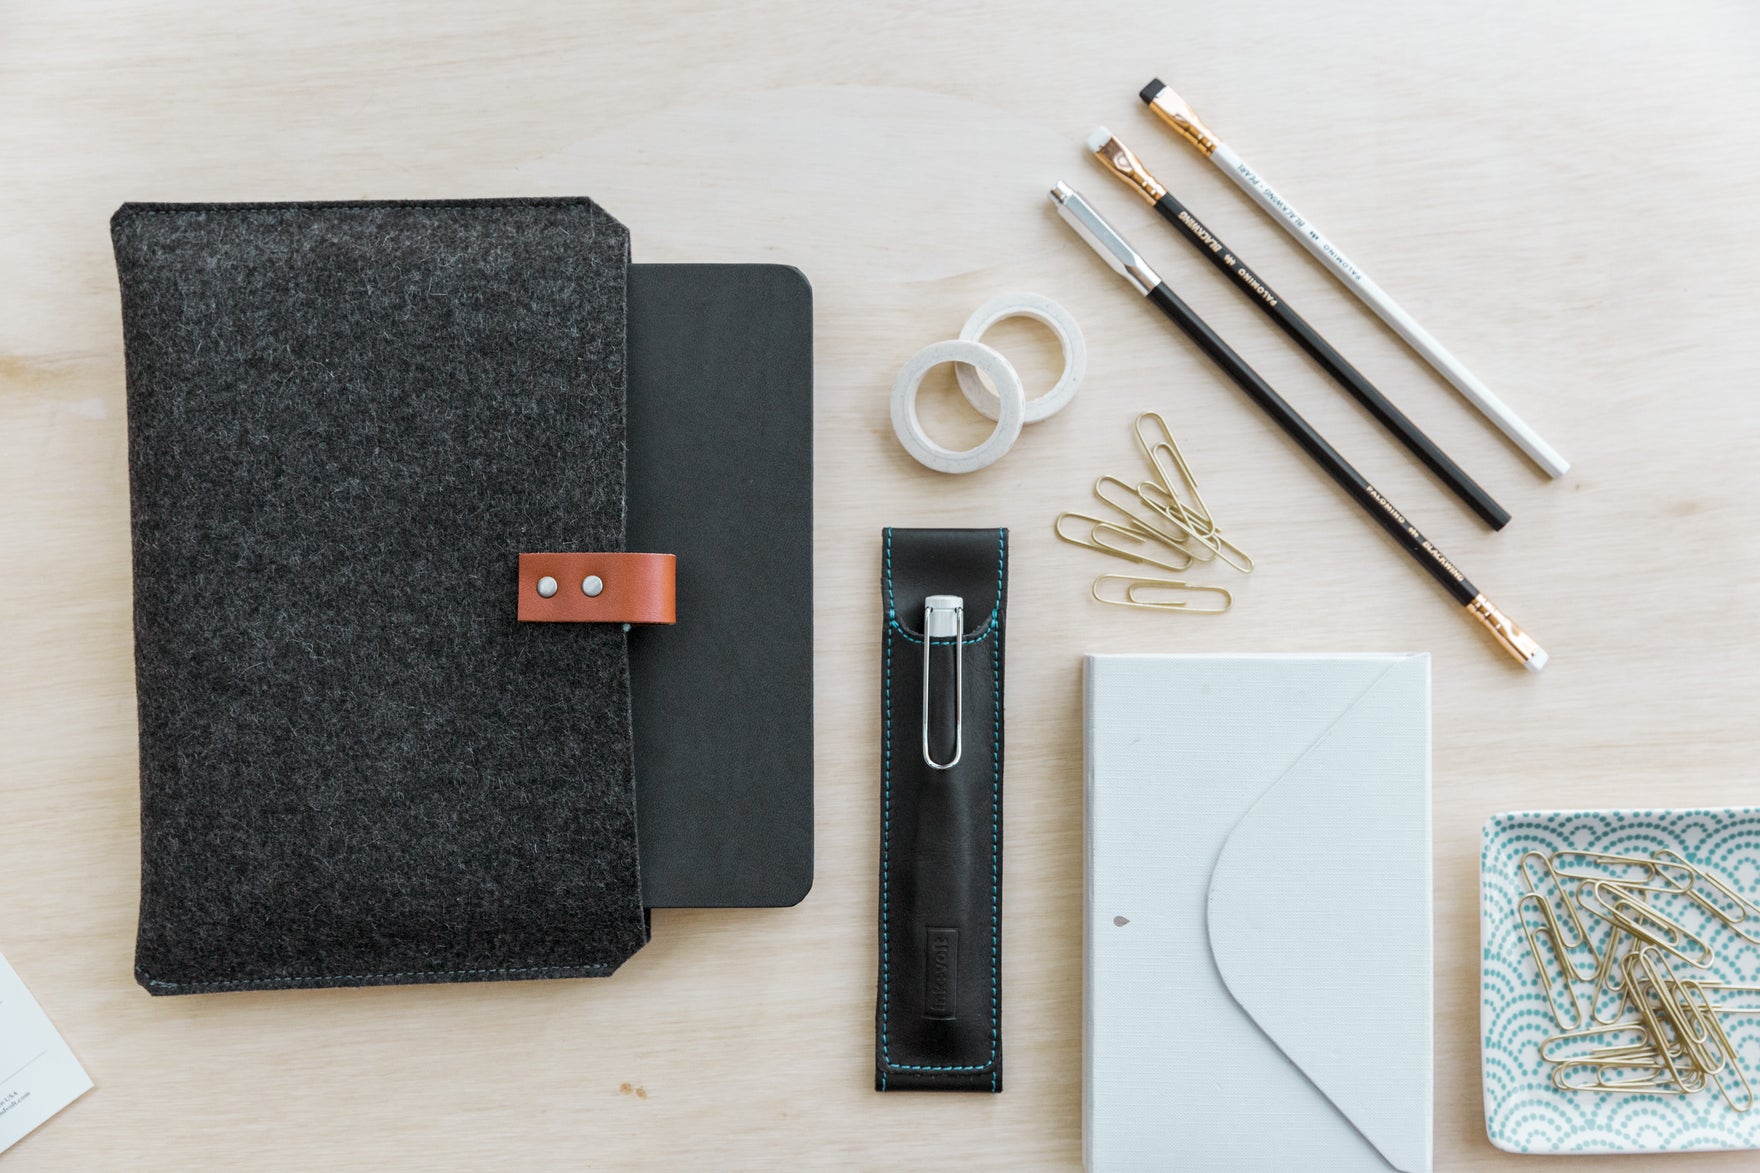 A planner in a wool sleeve, on a wooden desk next to office supplies like pencils, tape, a pen, envelopes, and paper clips.